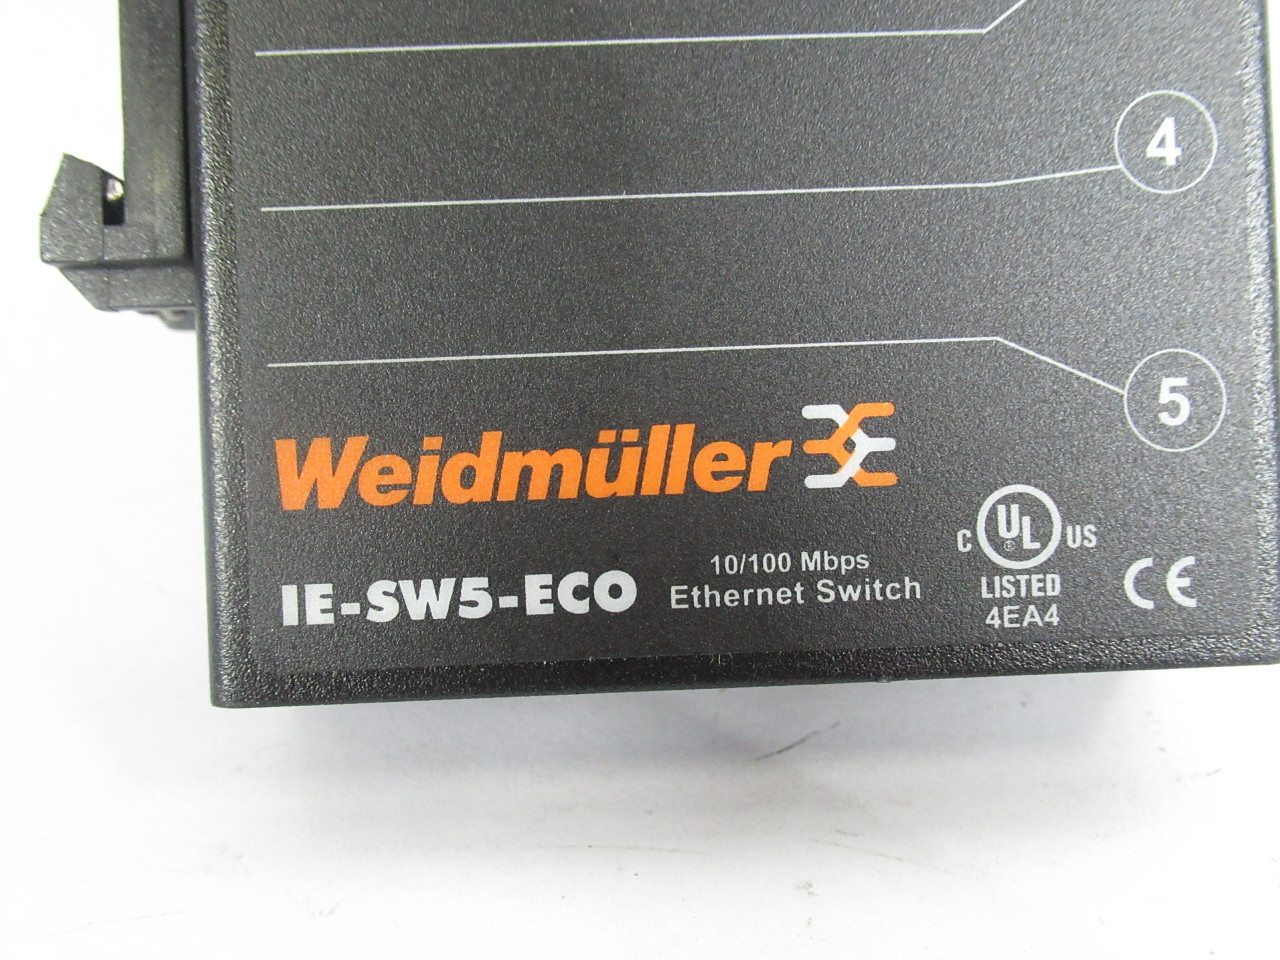 Weidmuller 8808230000 IE-SW5-ECO Ethernet Switch 10/100mbps 10-30VDC@5W USED